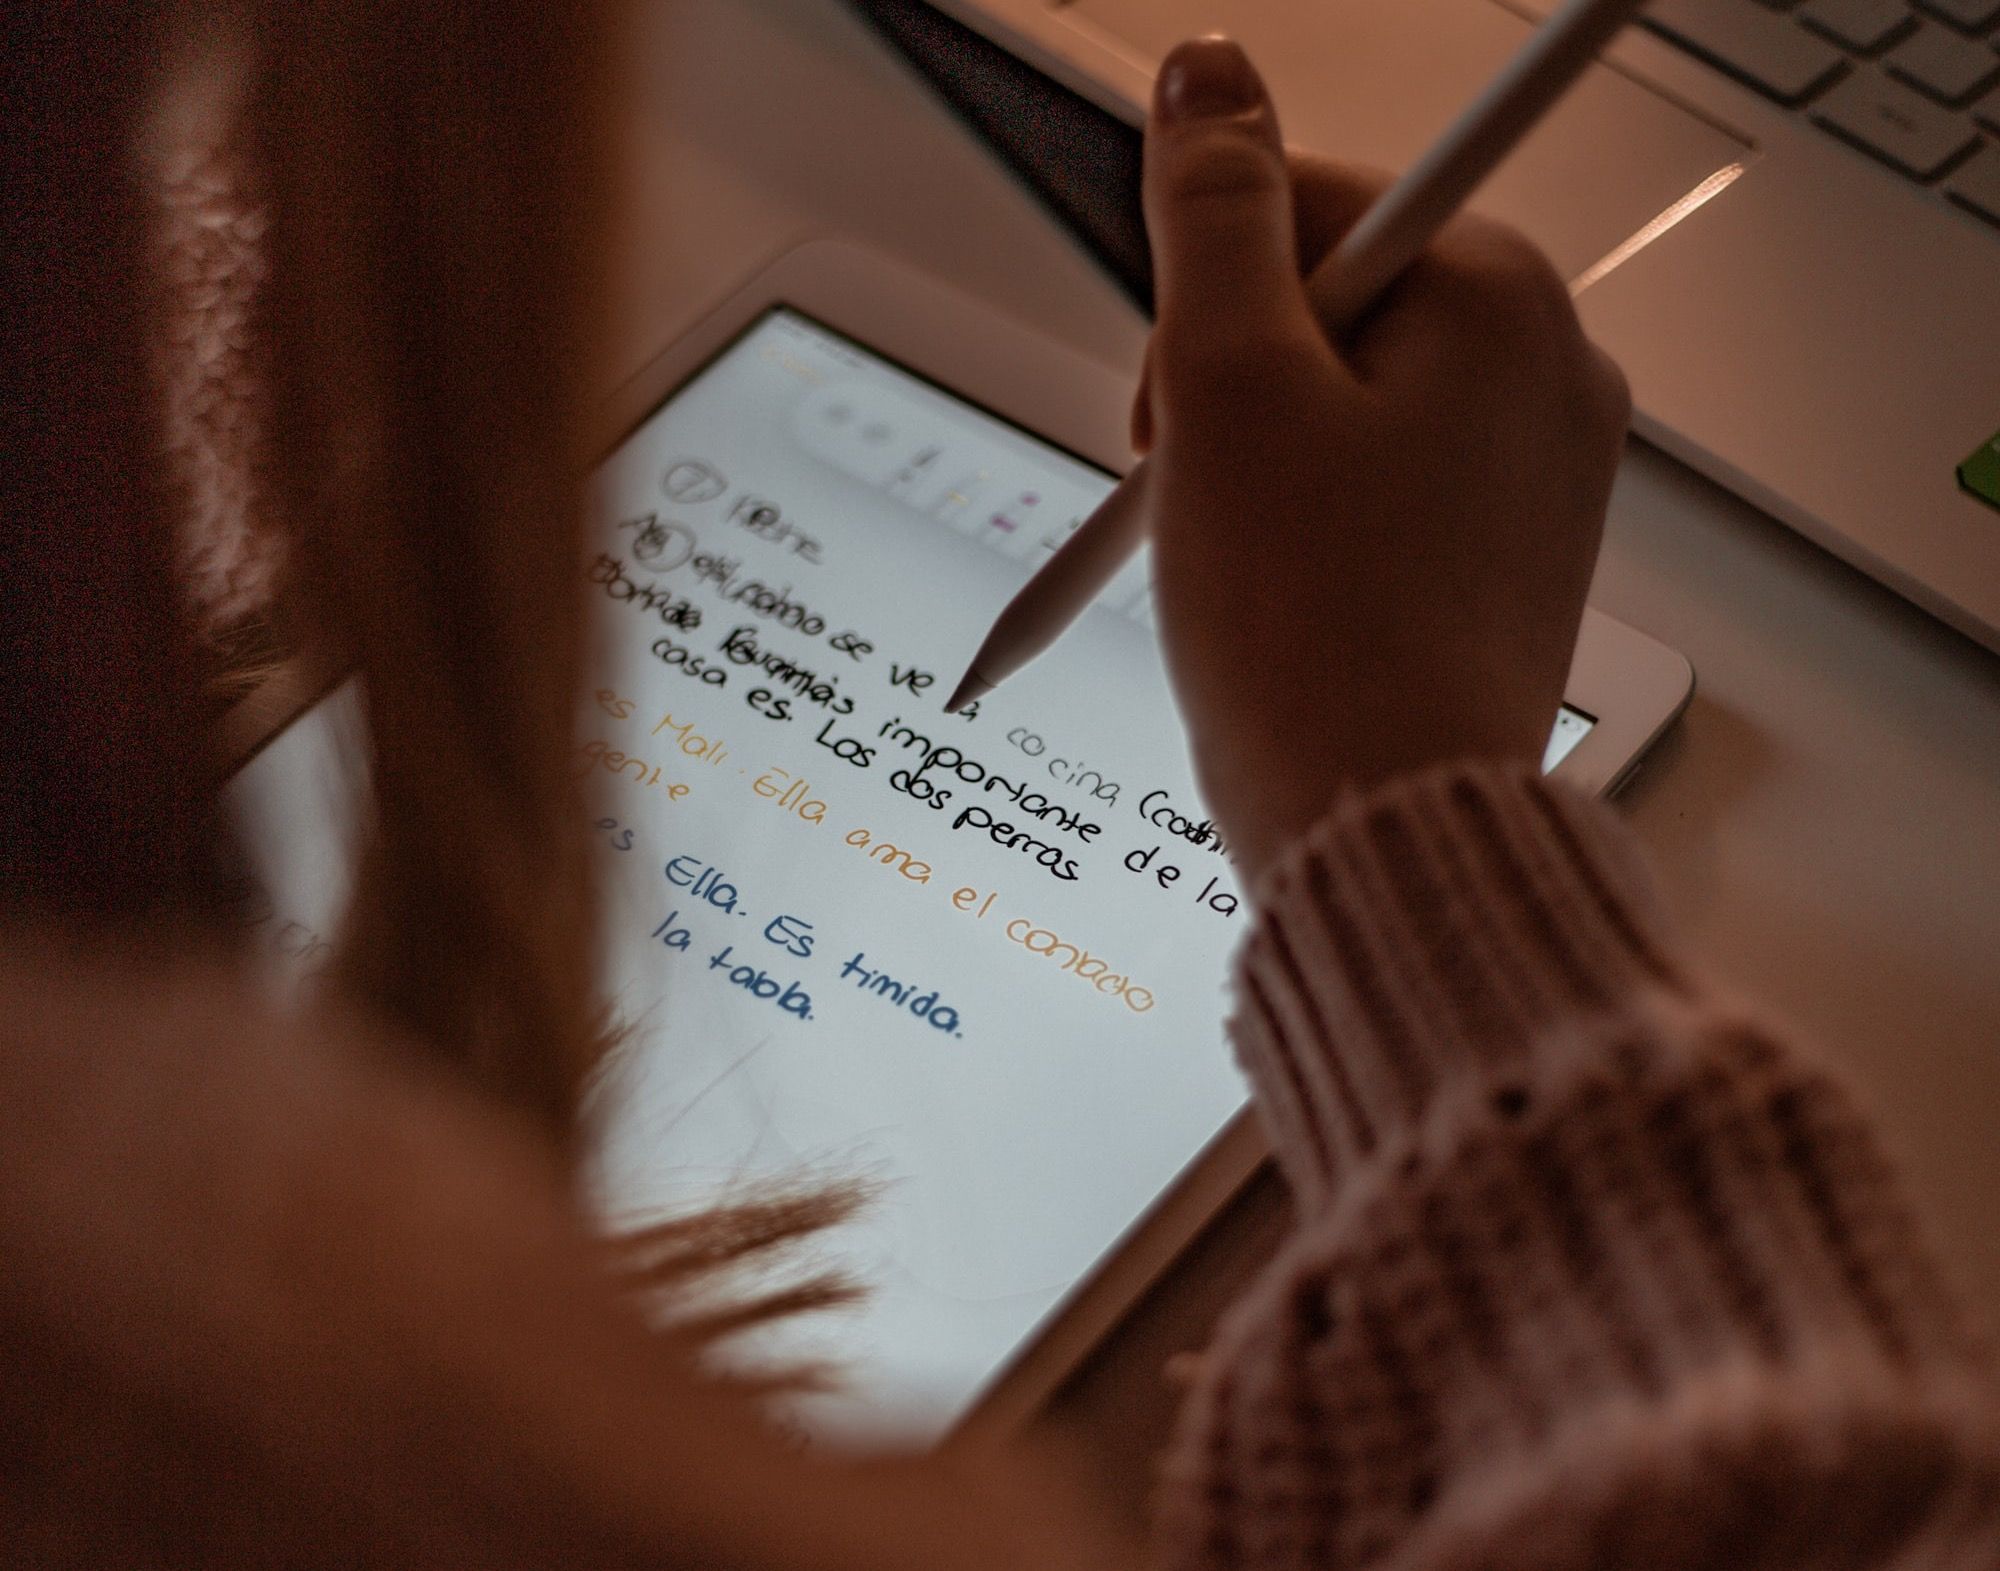 This startup has secured €6.5 million to elevate Spanish writing skills with AI